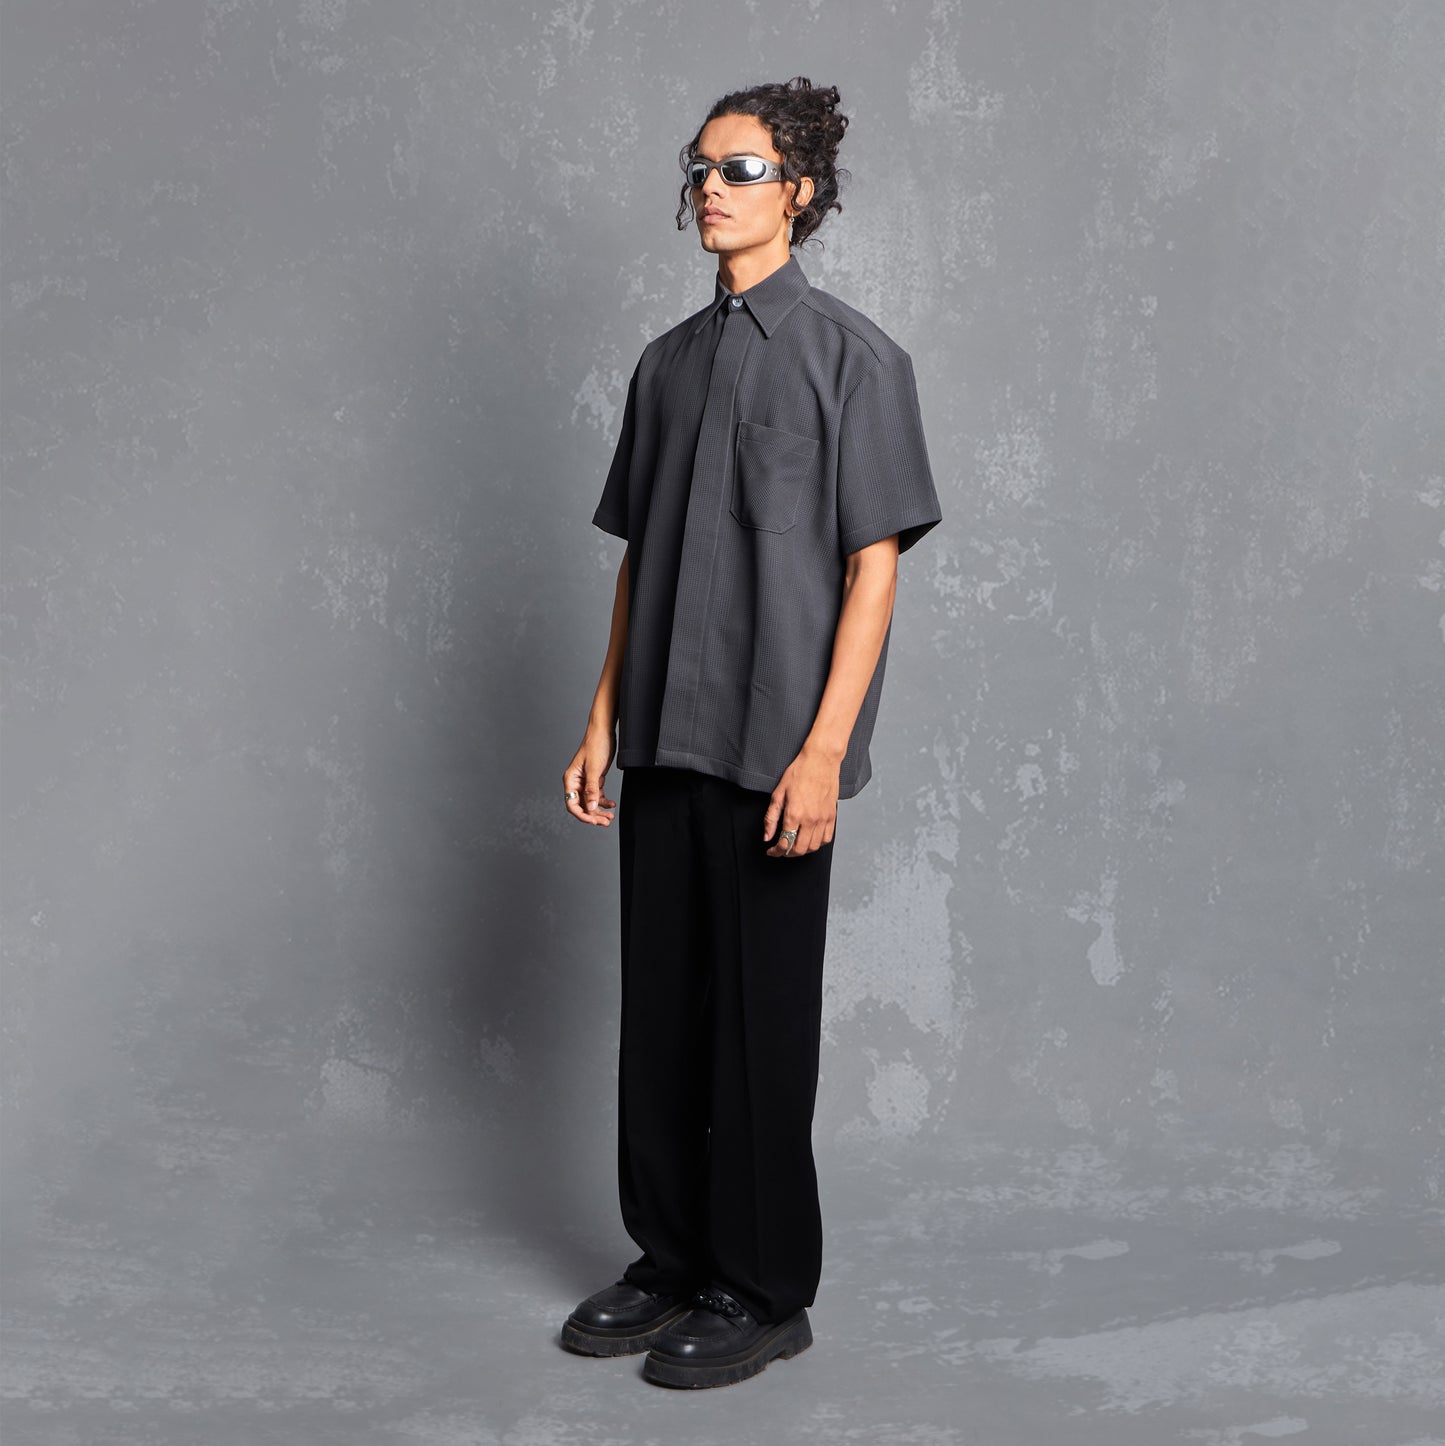 model, editorial, lookbook, unisex, wt loyalty program, relaxed fit, yamazaki pants, one piece cuban collar, slit on the bottom side seam, shirt with a neat look, mens summer fashion, fashion styling inspiration,people also ask